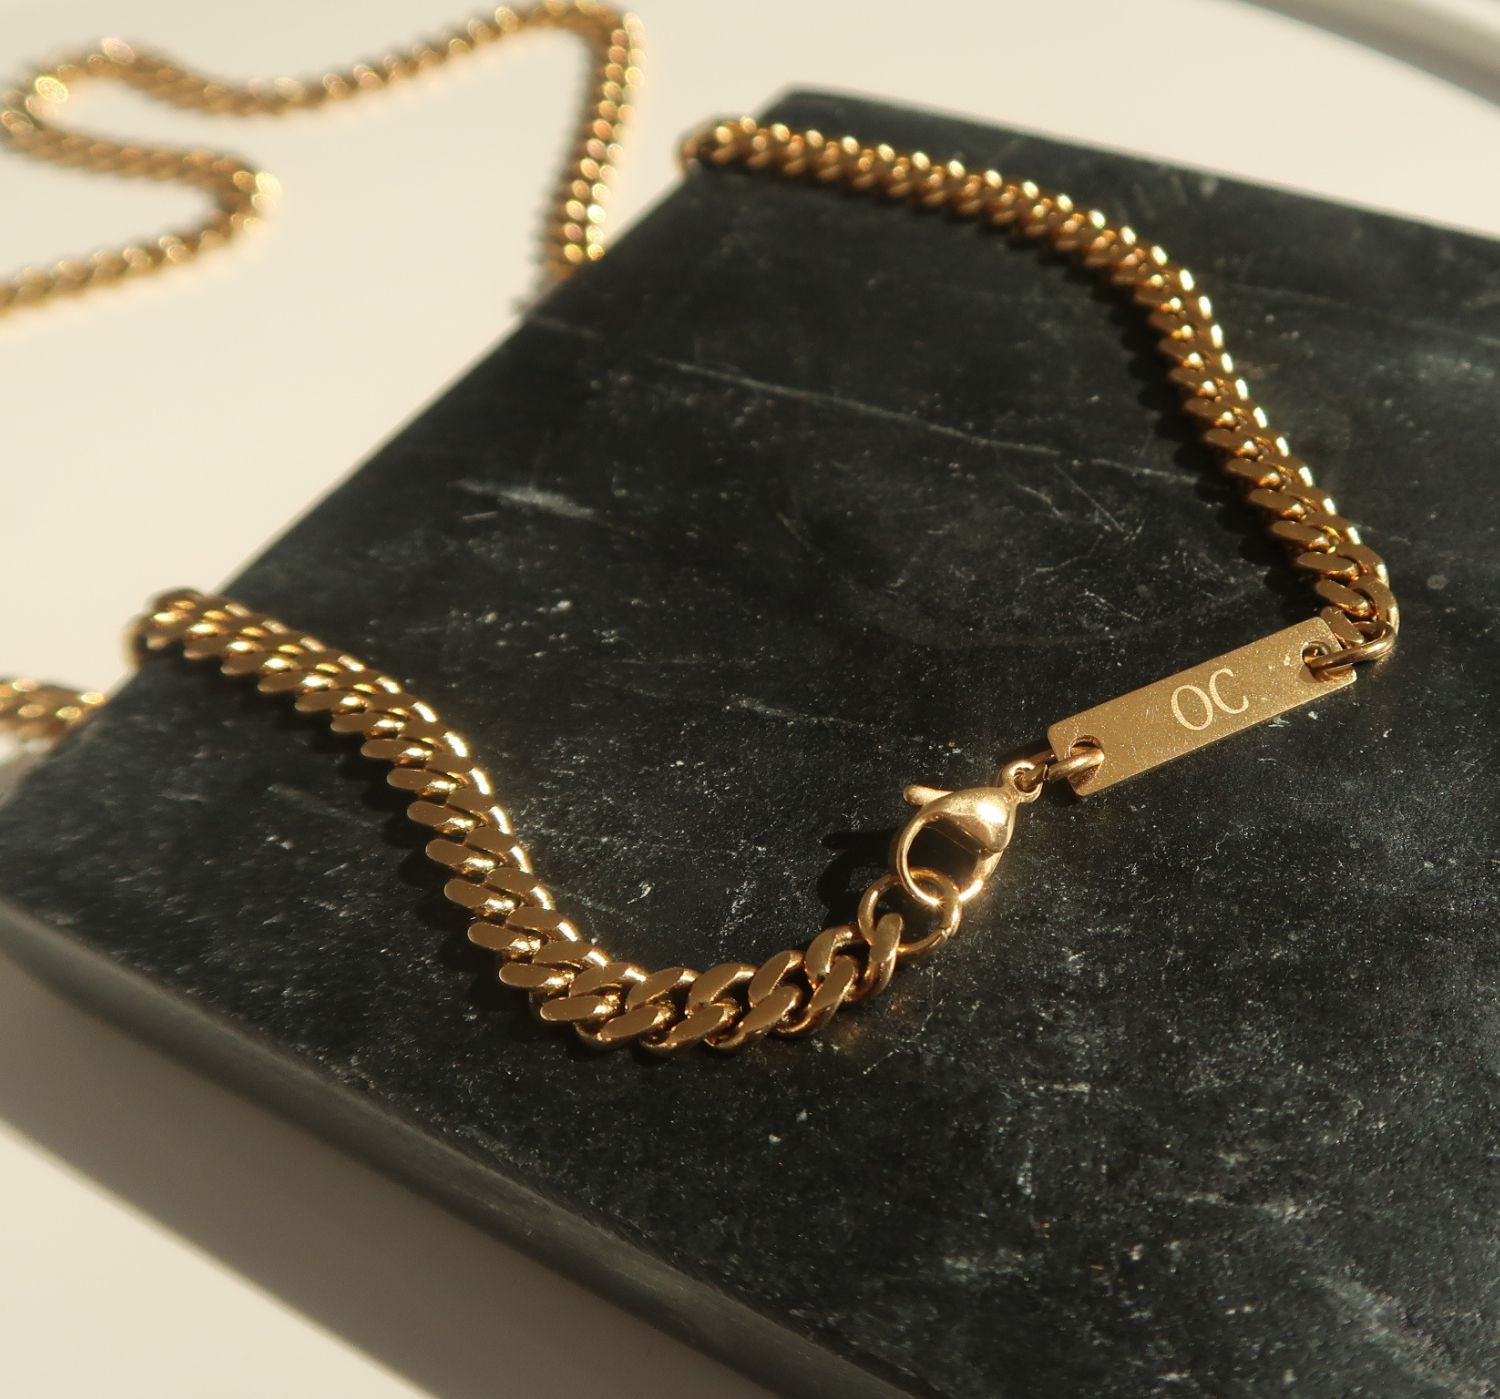 8mm Cuban Chain  Gold - Oliver Cabell